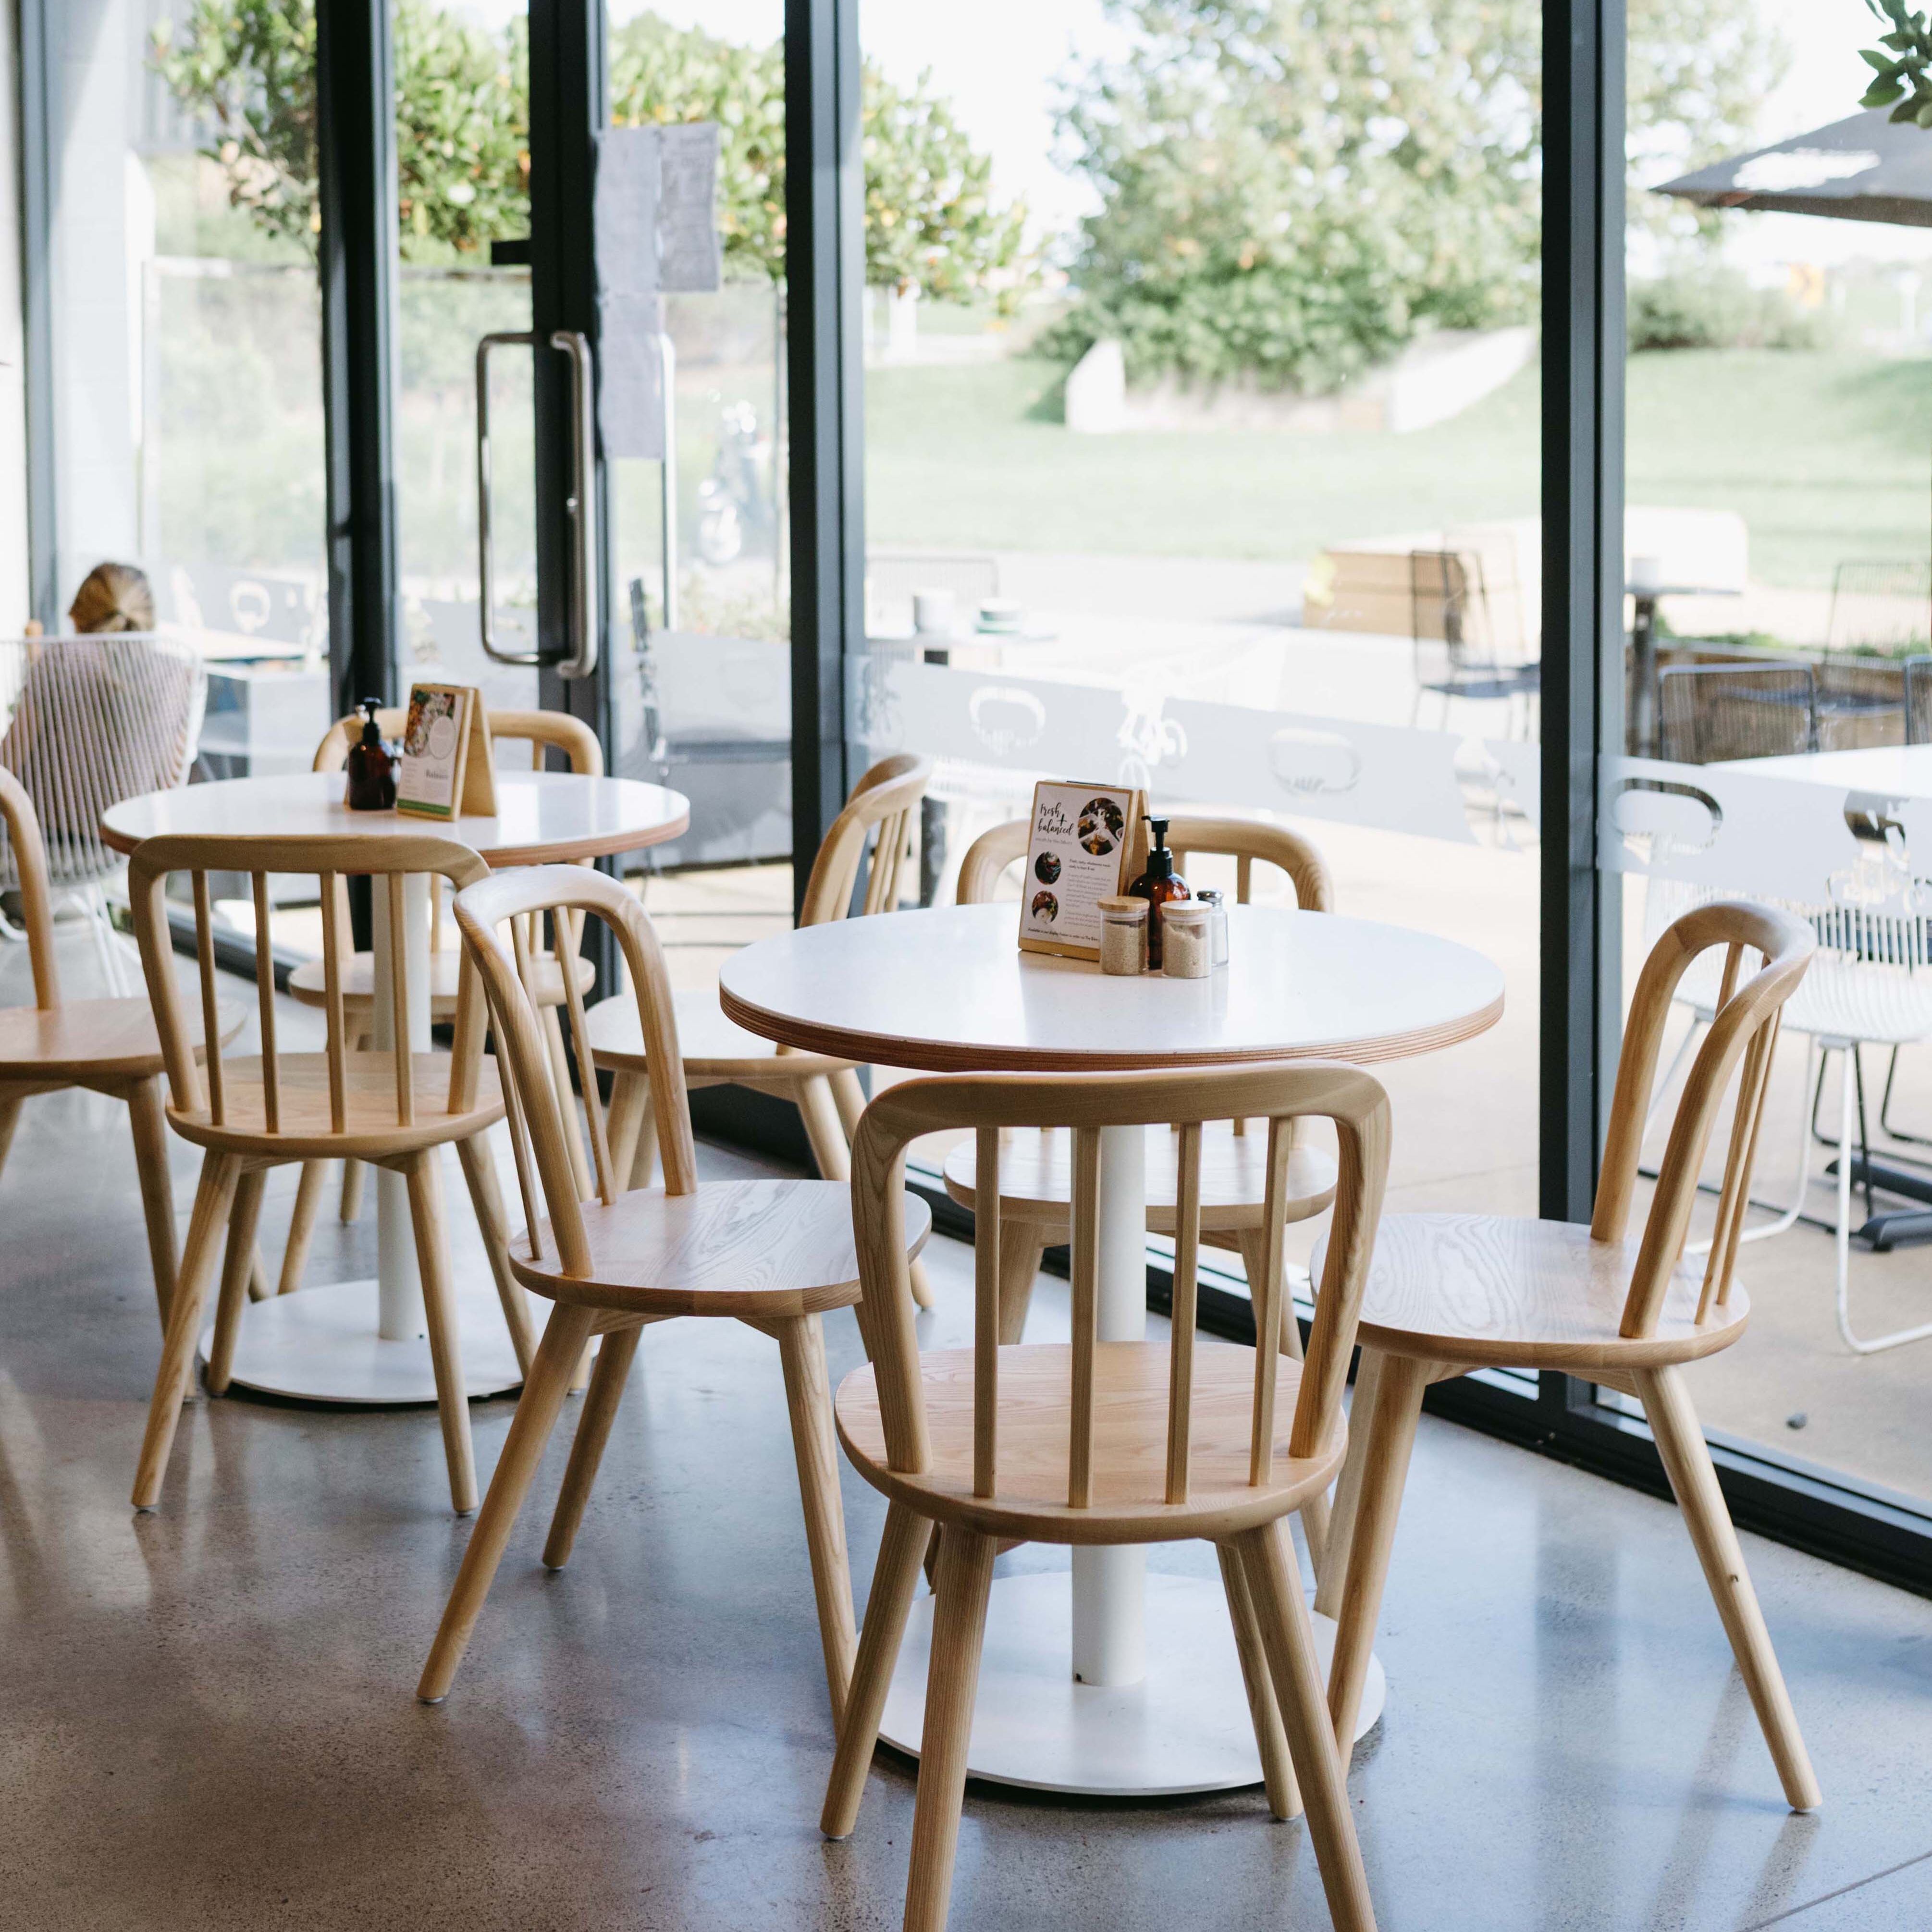 Bikey Cafe with clear timber cafe furniture